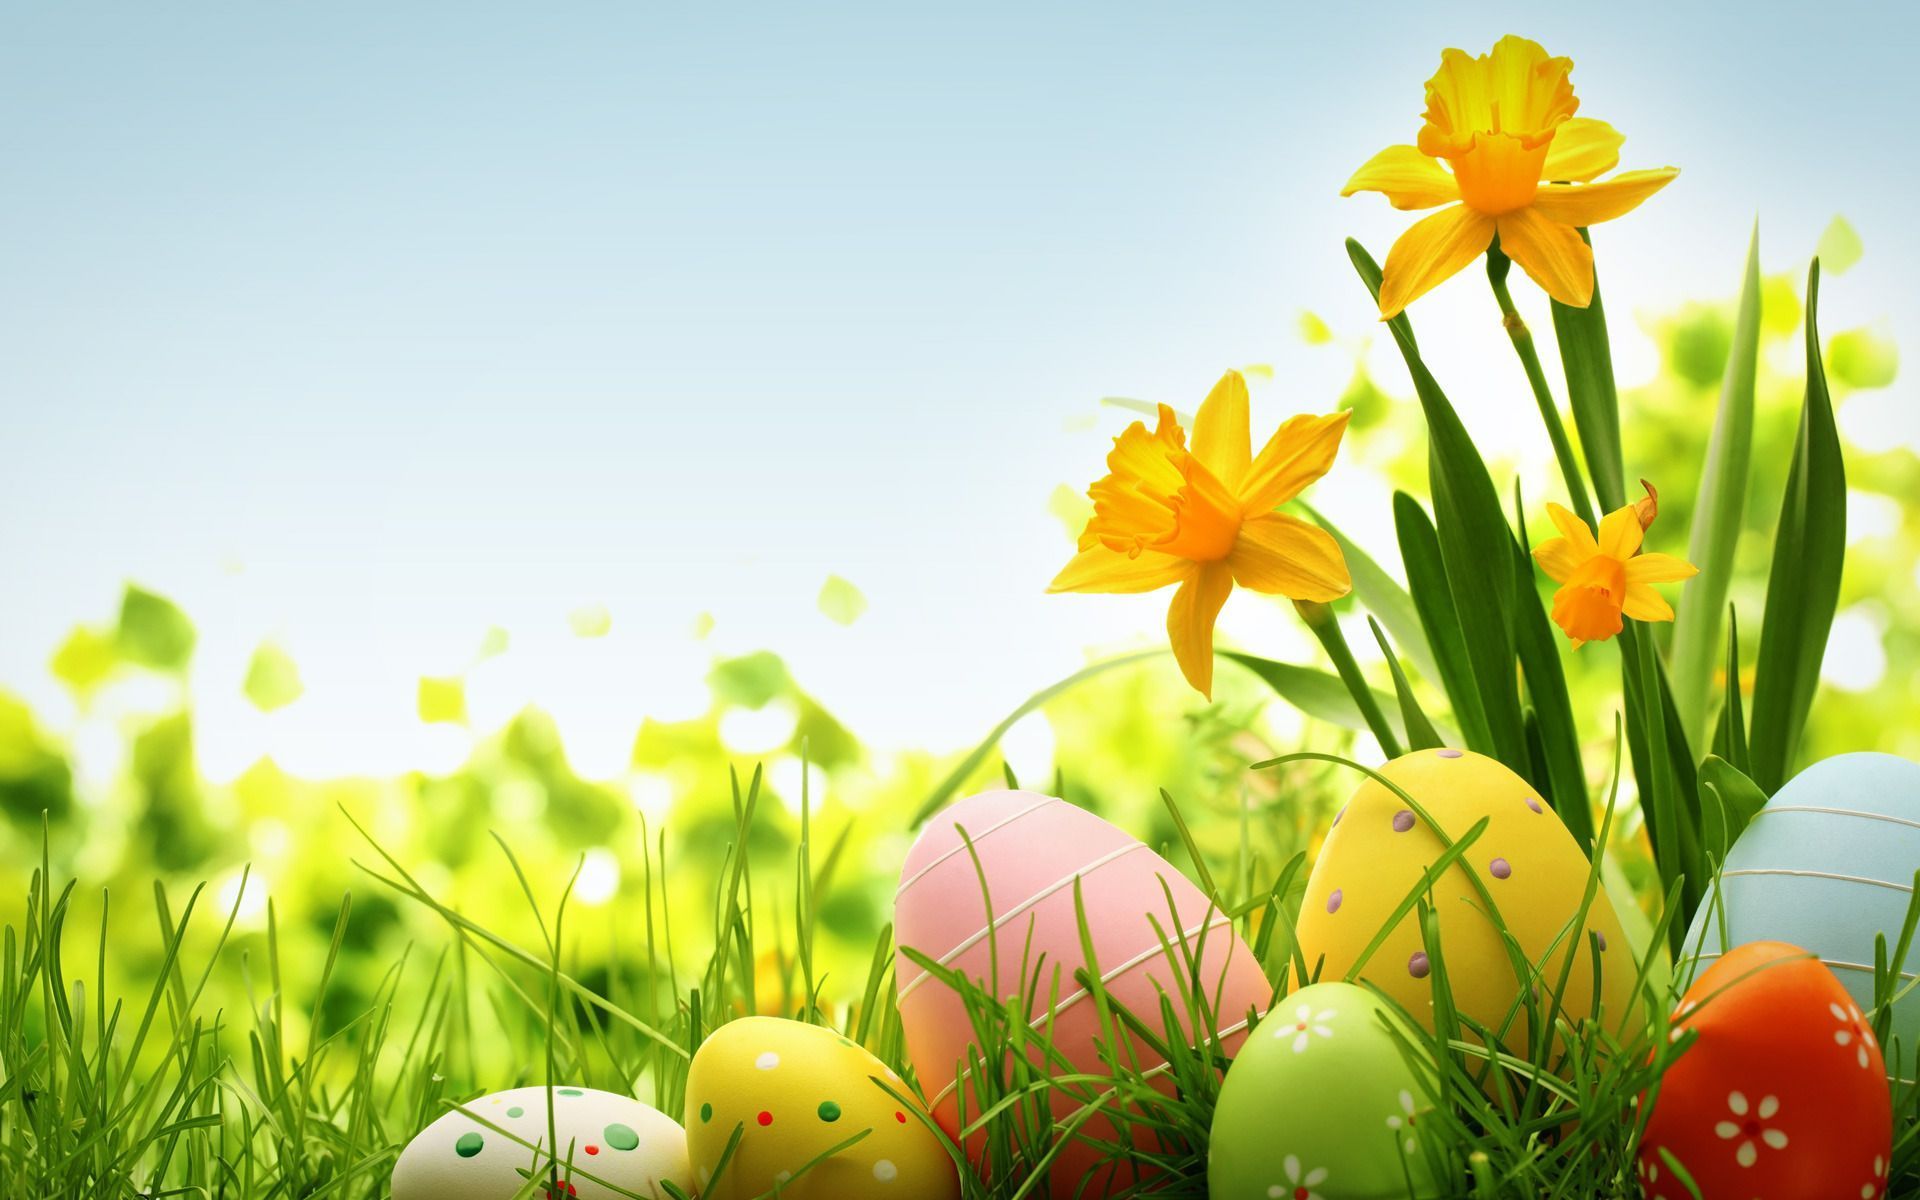 Images of Easter Holiday | Wallpapers, Backgrounds, Images, Art ...